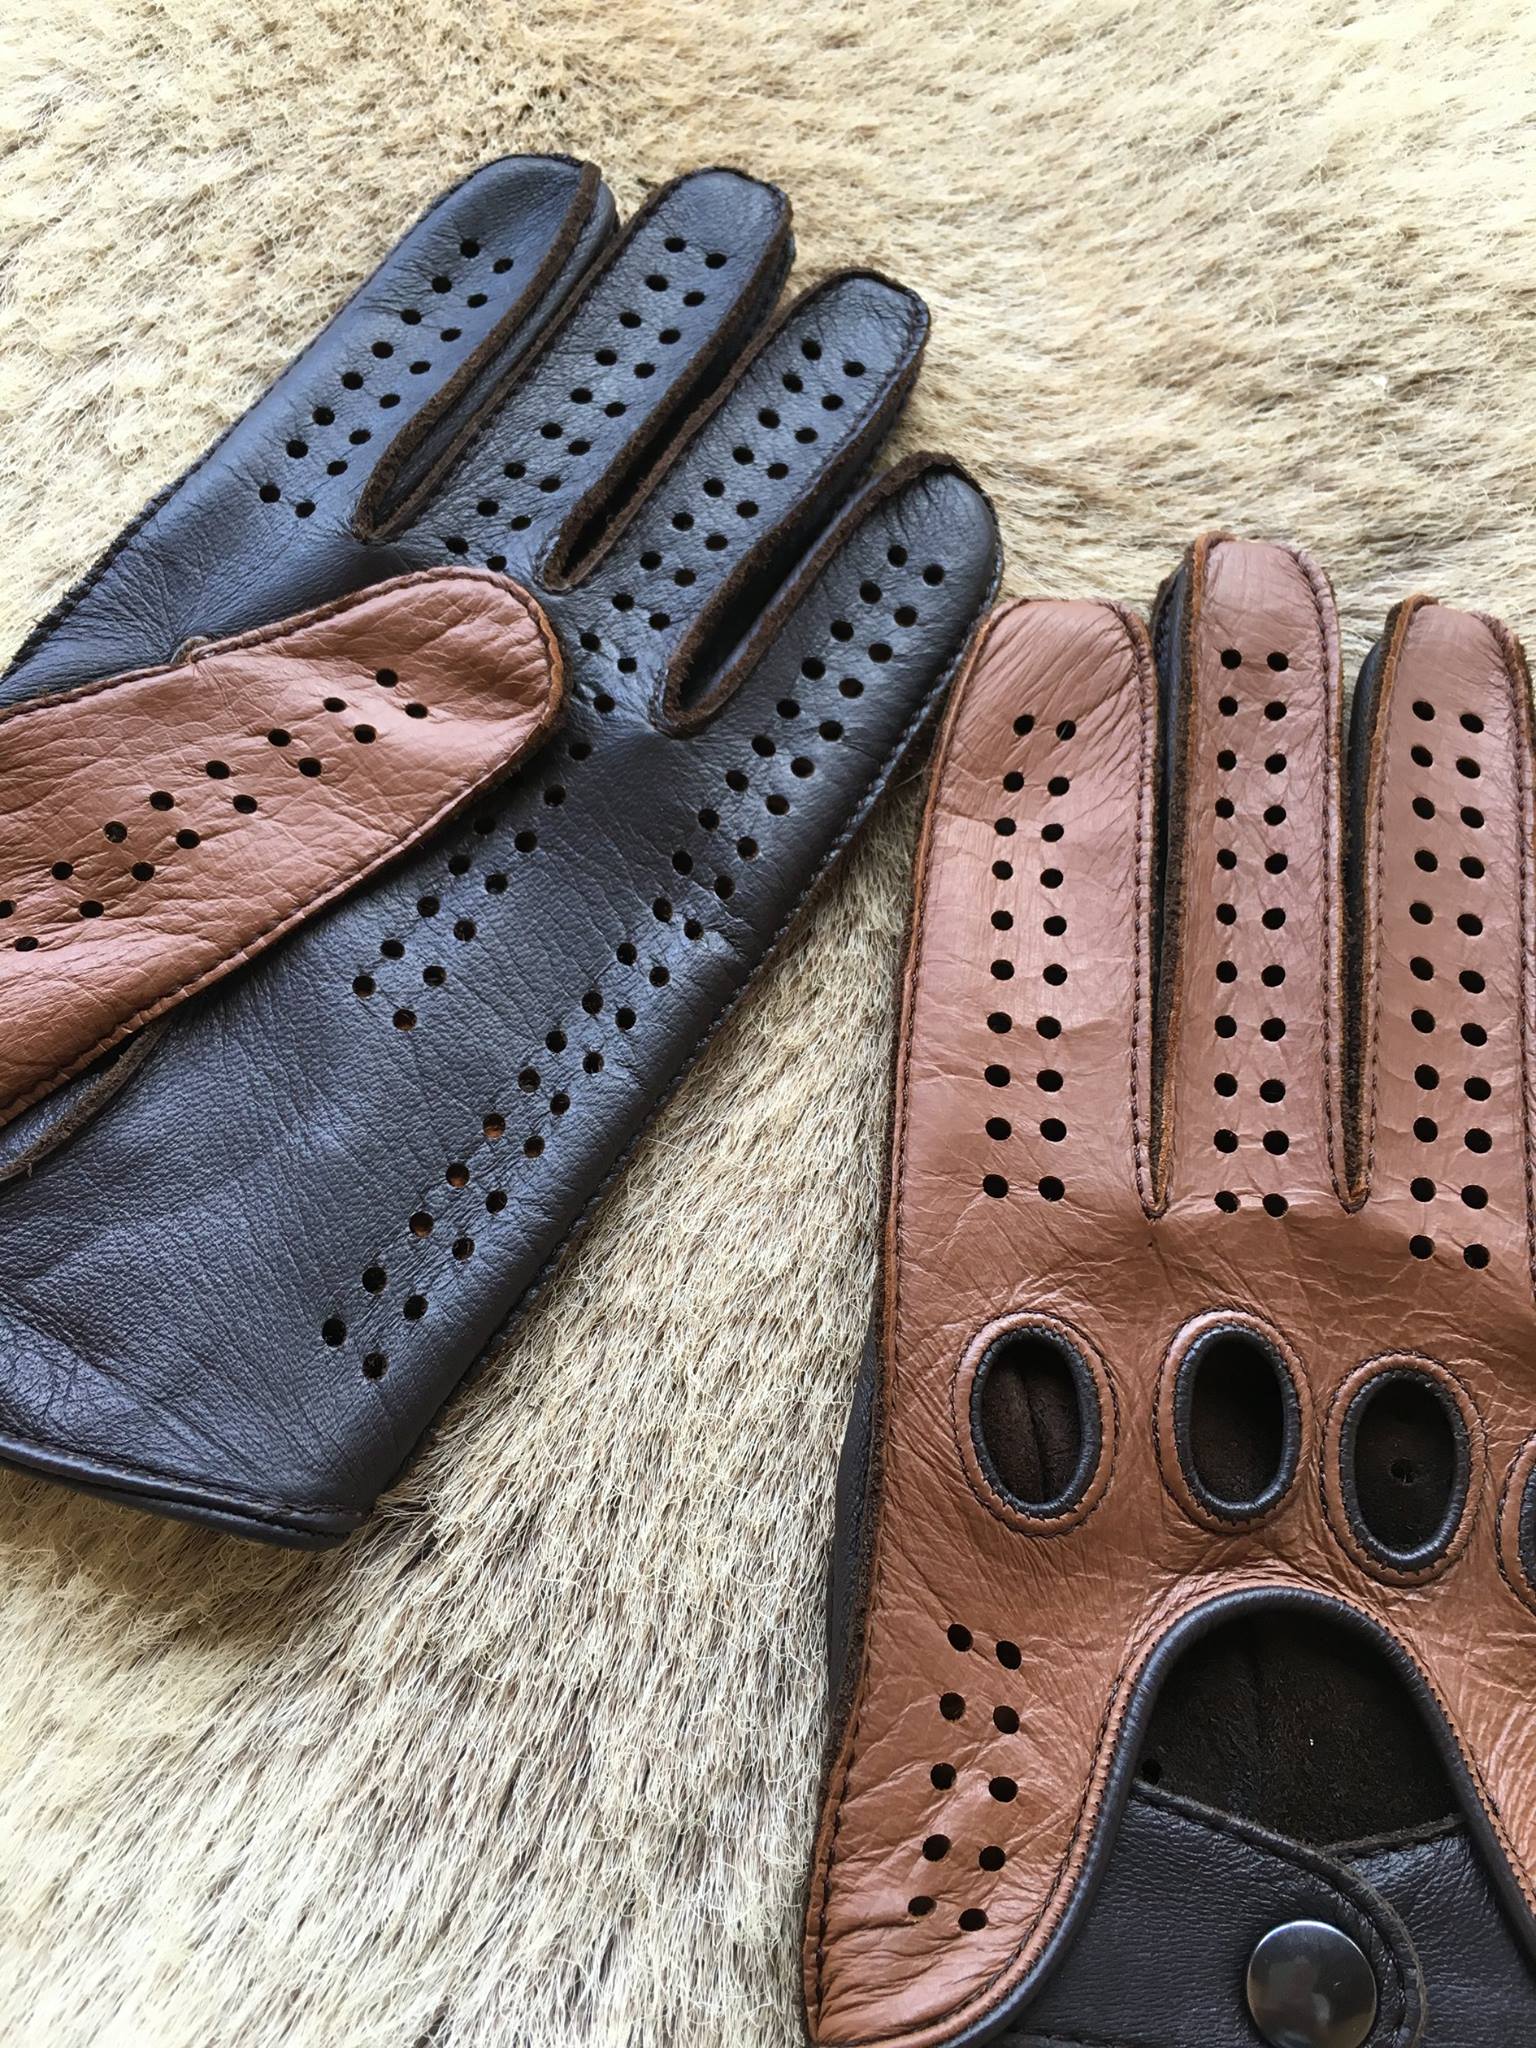 Hungant Peccary Leather Gloves Review - $140 - BestLeather.org